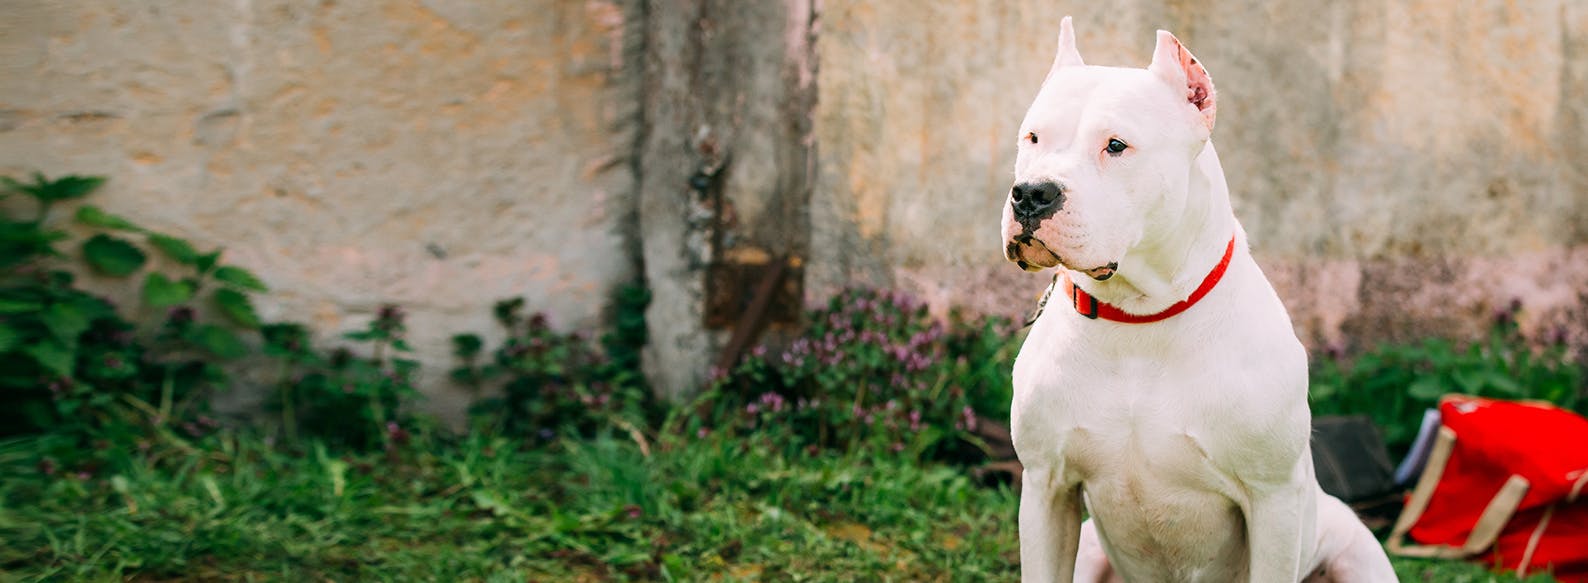 Dogo Argentino Personality Traits & Facts